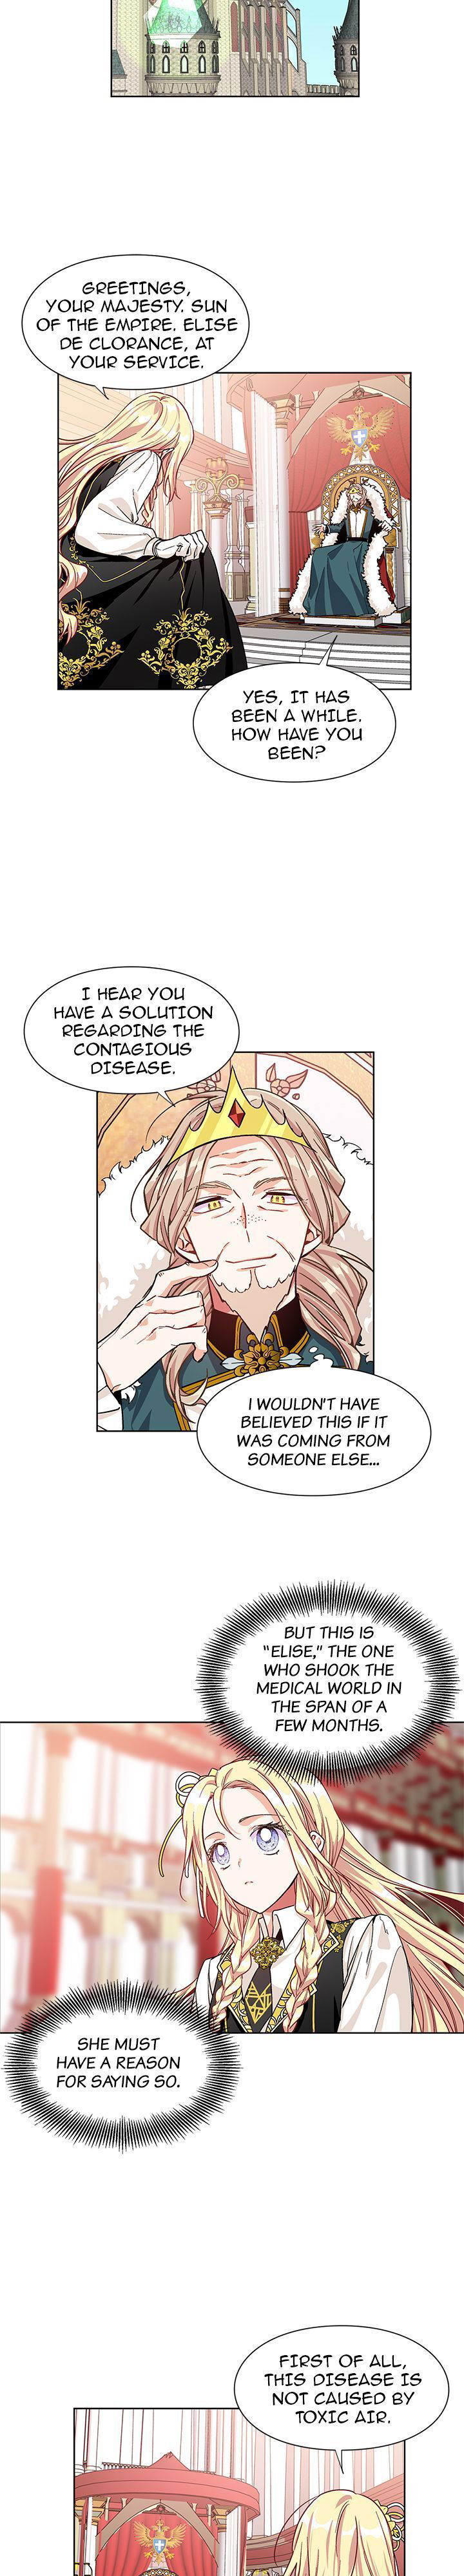 Doctor Elise: The Royal Lady with the Lamp Chapter 045 page 4